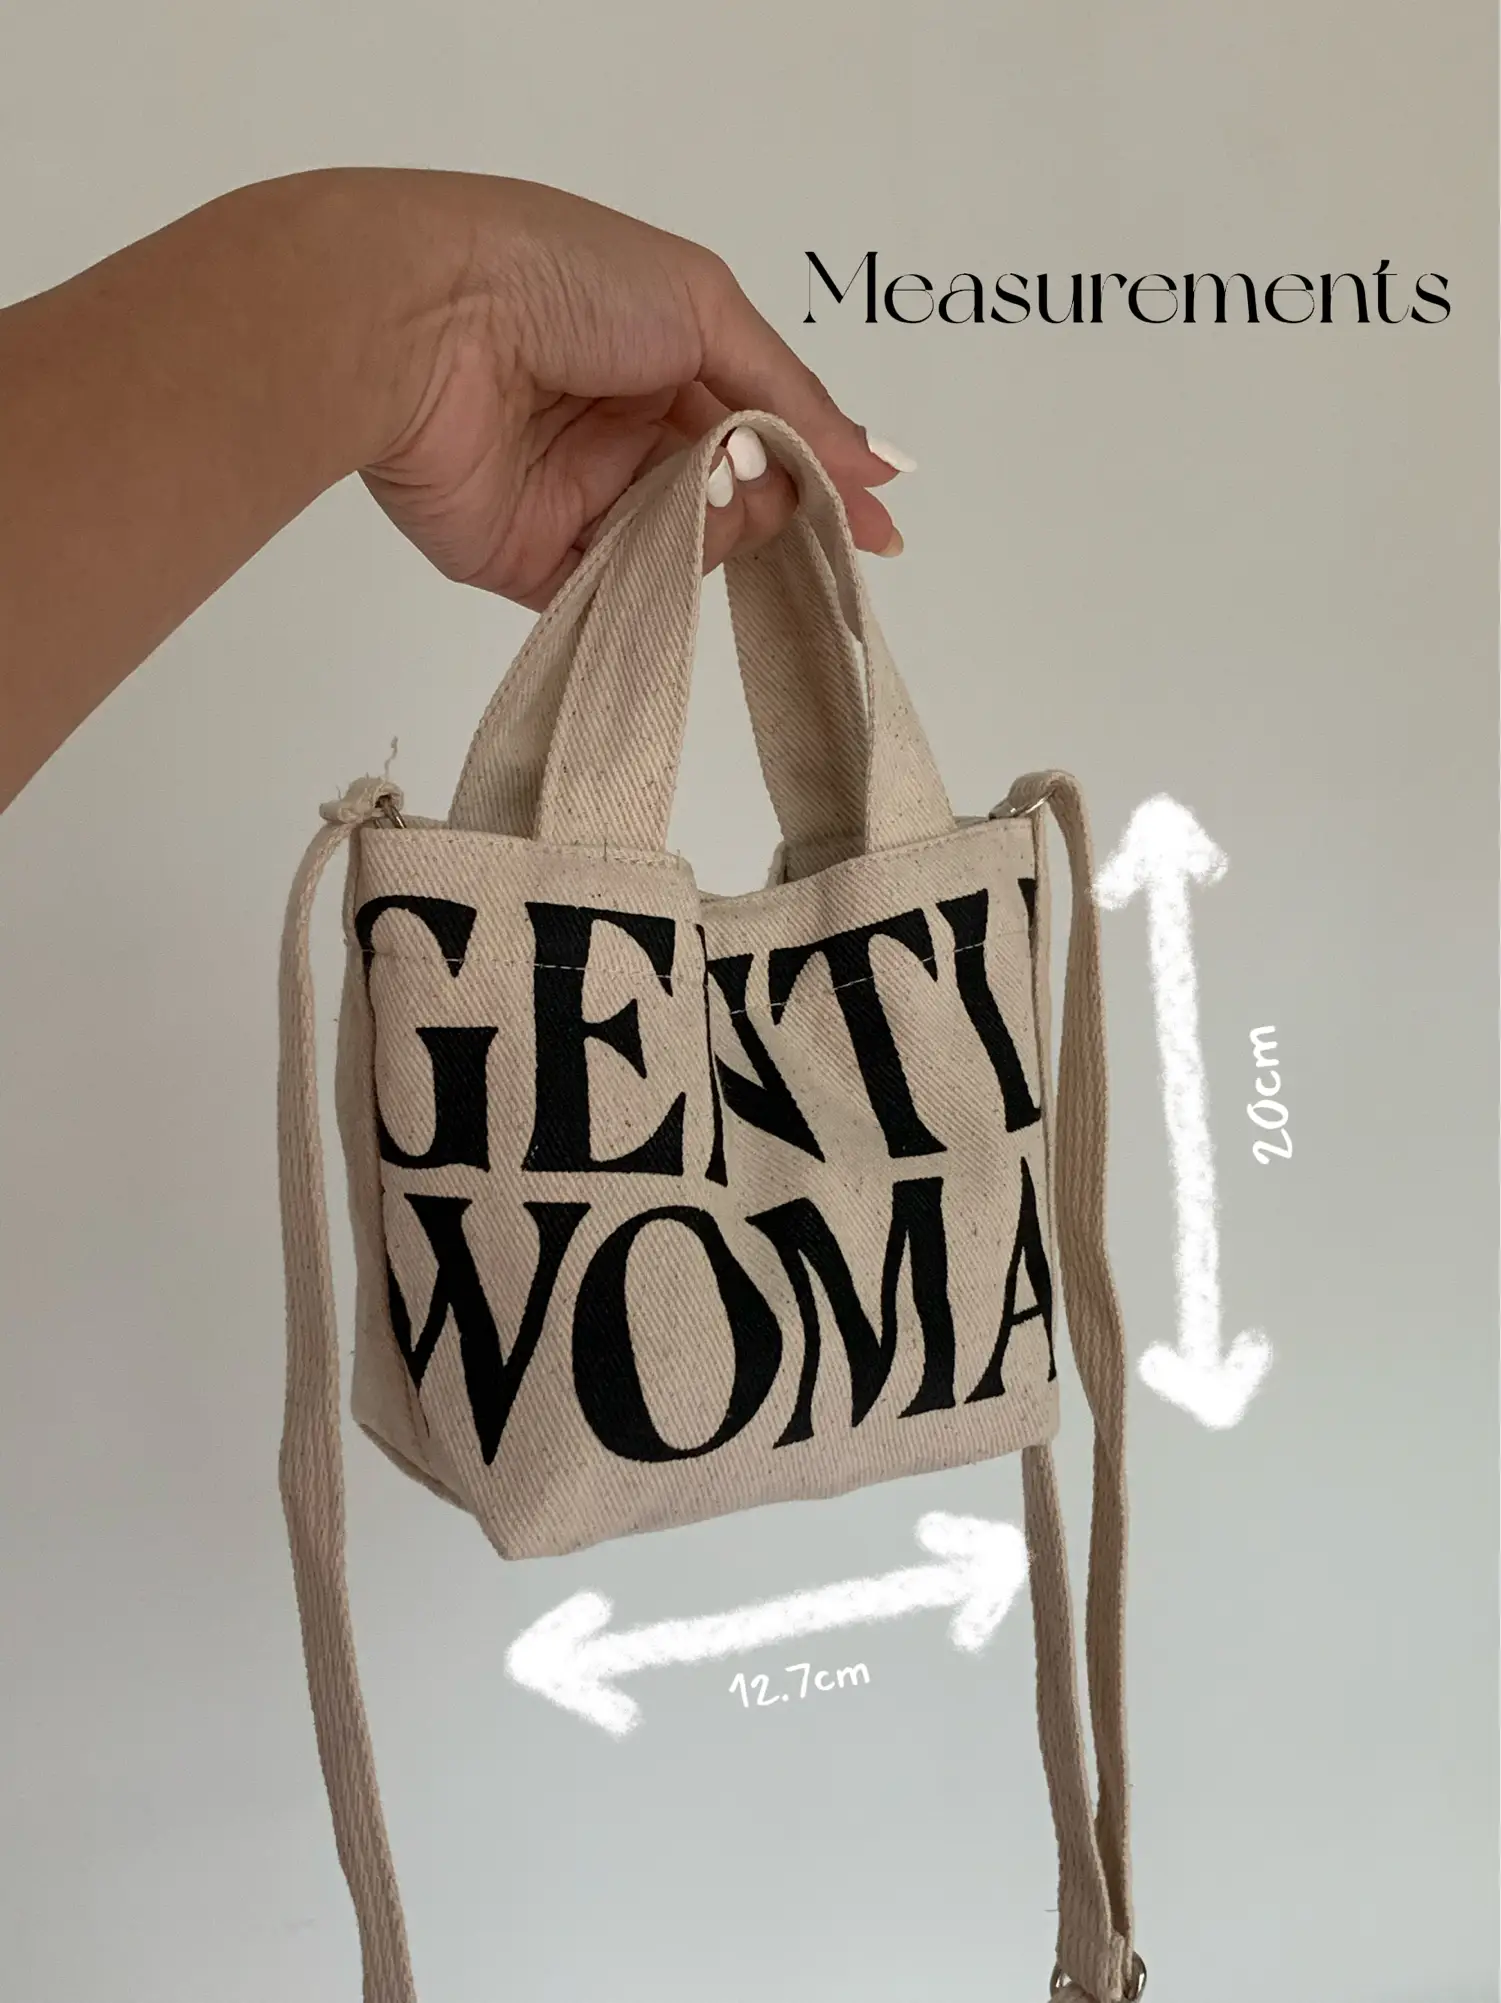 Gentle Woman Micro bag, is it worth it?! | Gallery posted by